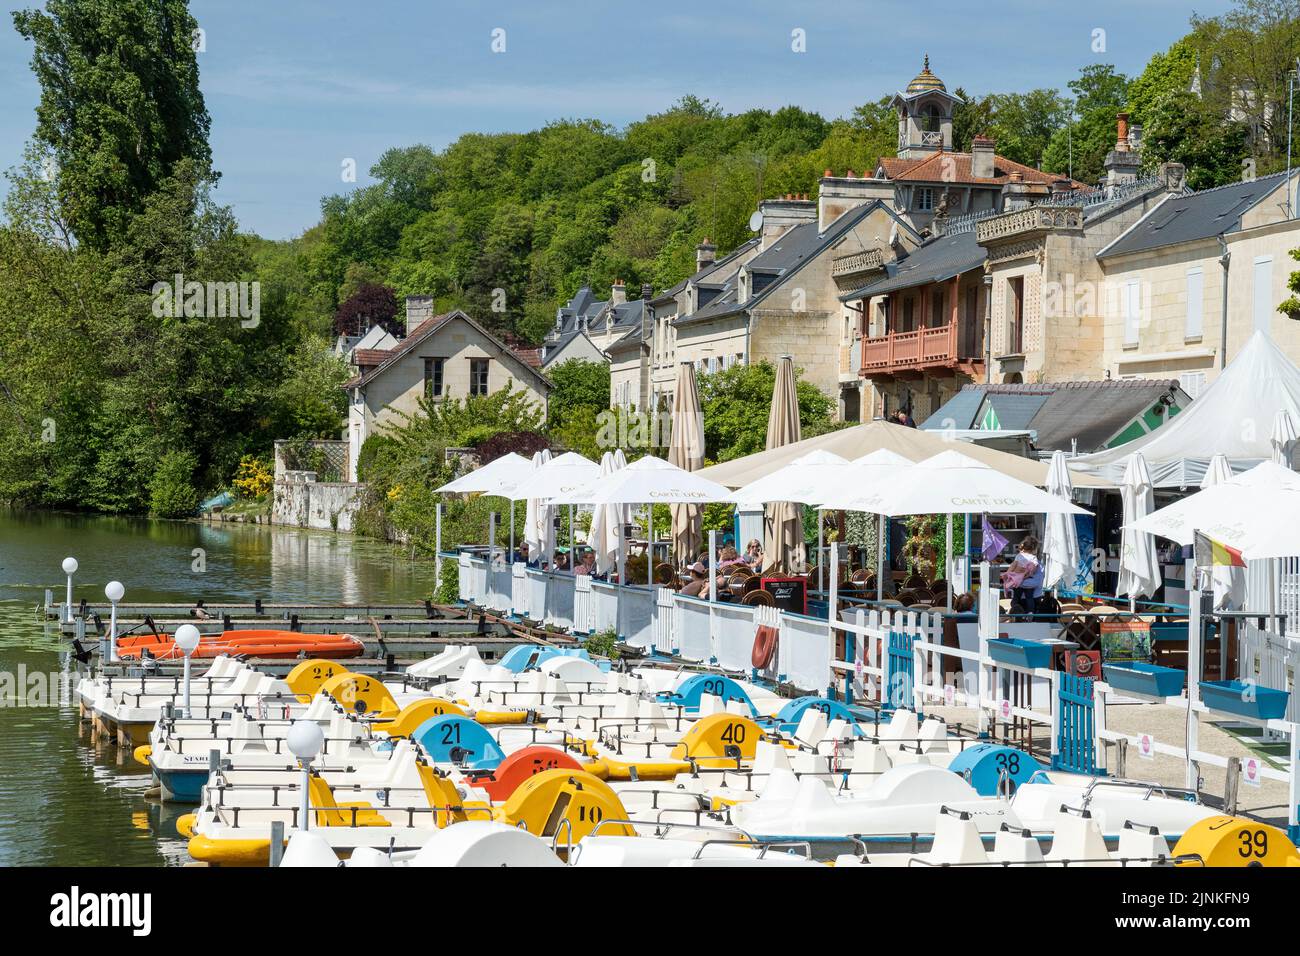 France, Oise, Picardie, Pierrefonds, Pierrefonds lake with coffee terrace and pedal boats rental // France, Oise (60), Picardie, Pierrefonds, lac de P Stock Photo